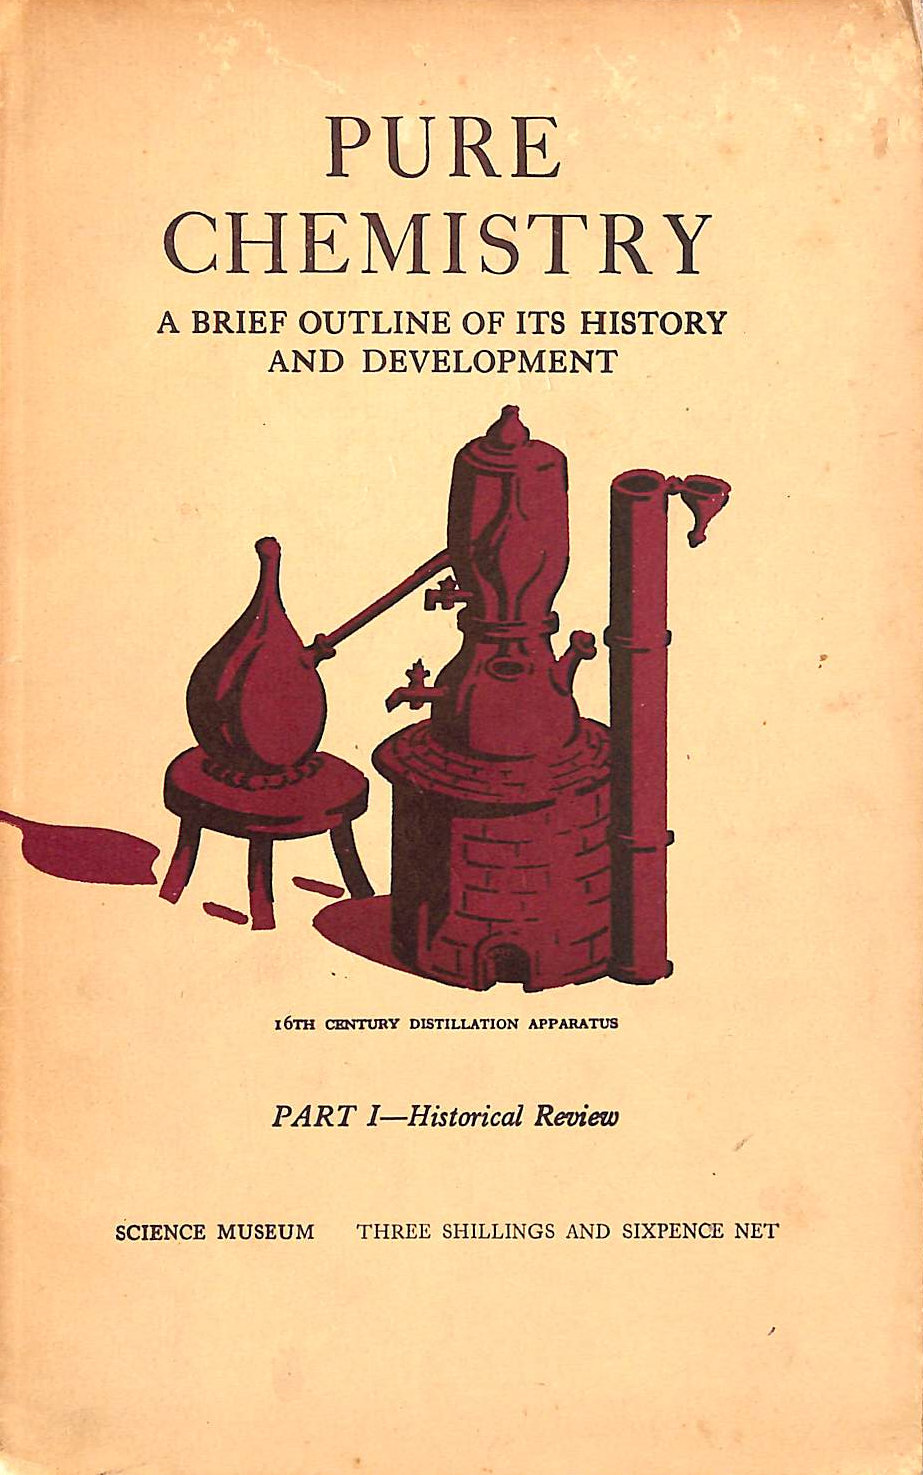 BARCLAY, A. - Pure Chemistry - A Brief Outline Of Its History And Development: Part I - Historical Review. Ministry Of Education Science Museum: